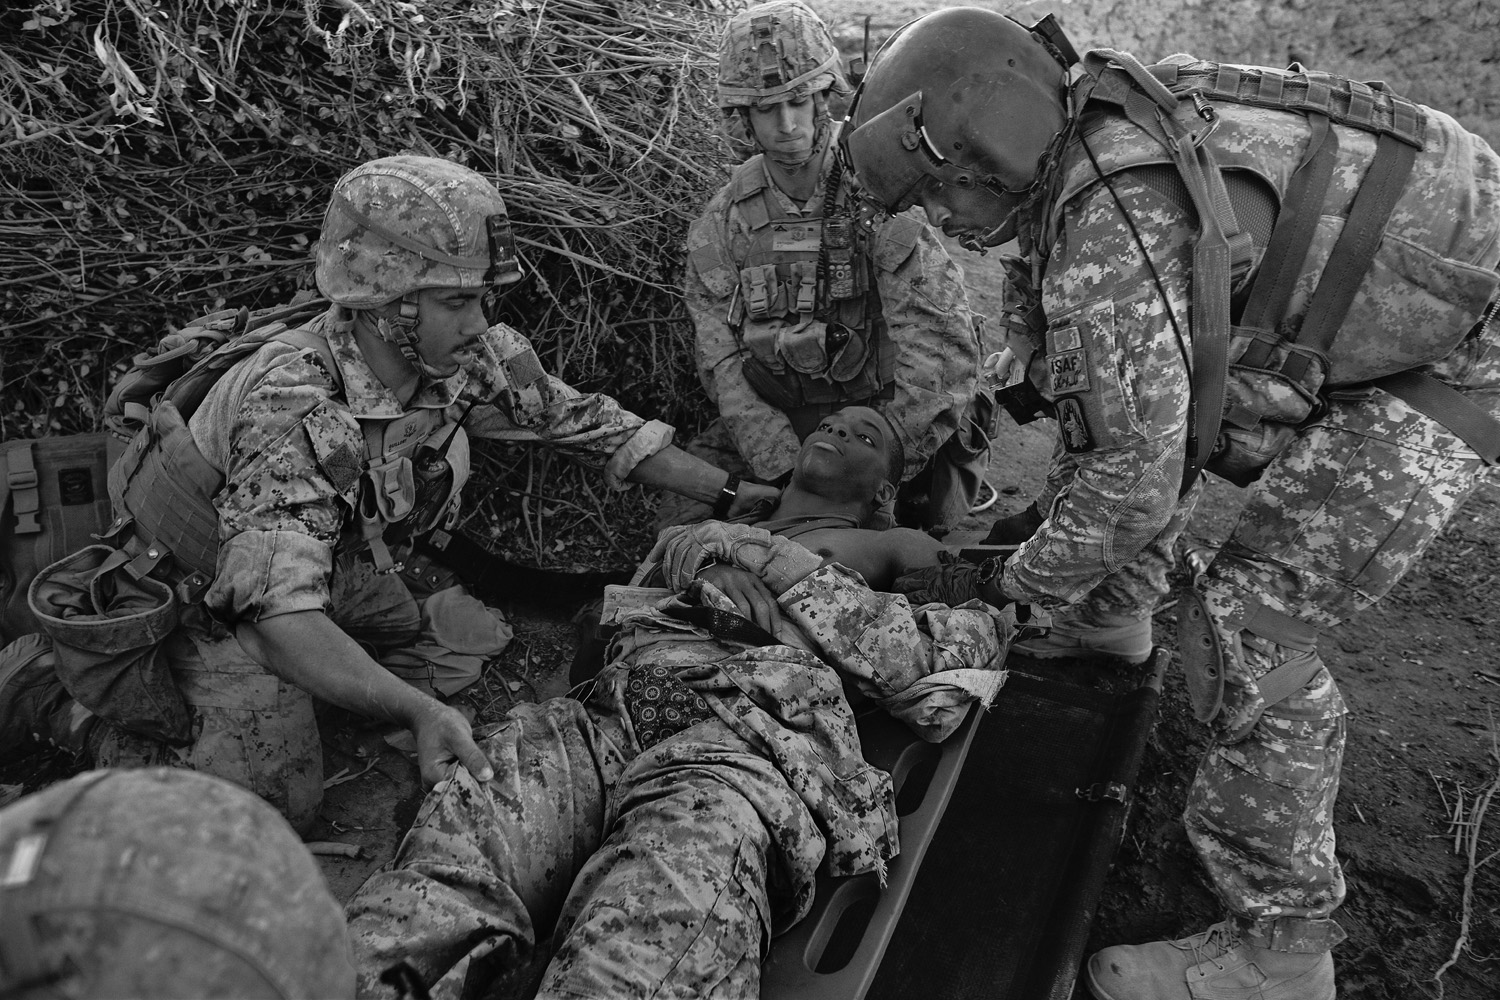 Medevac crew members prepare to evacuate a wounded Marine in Helmand province in 2010 (James Nachtwey for TIME)